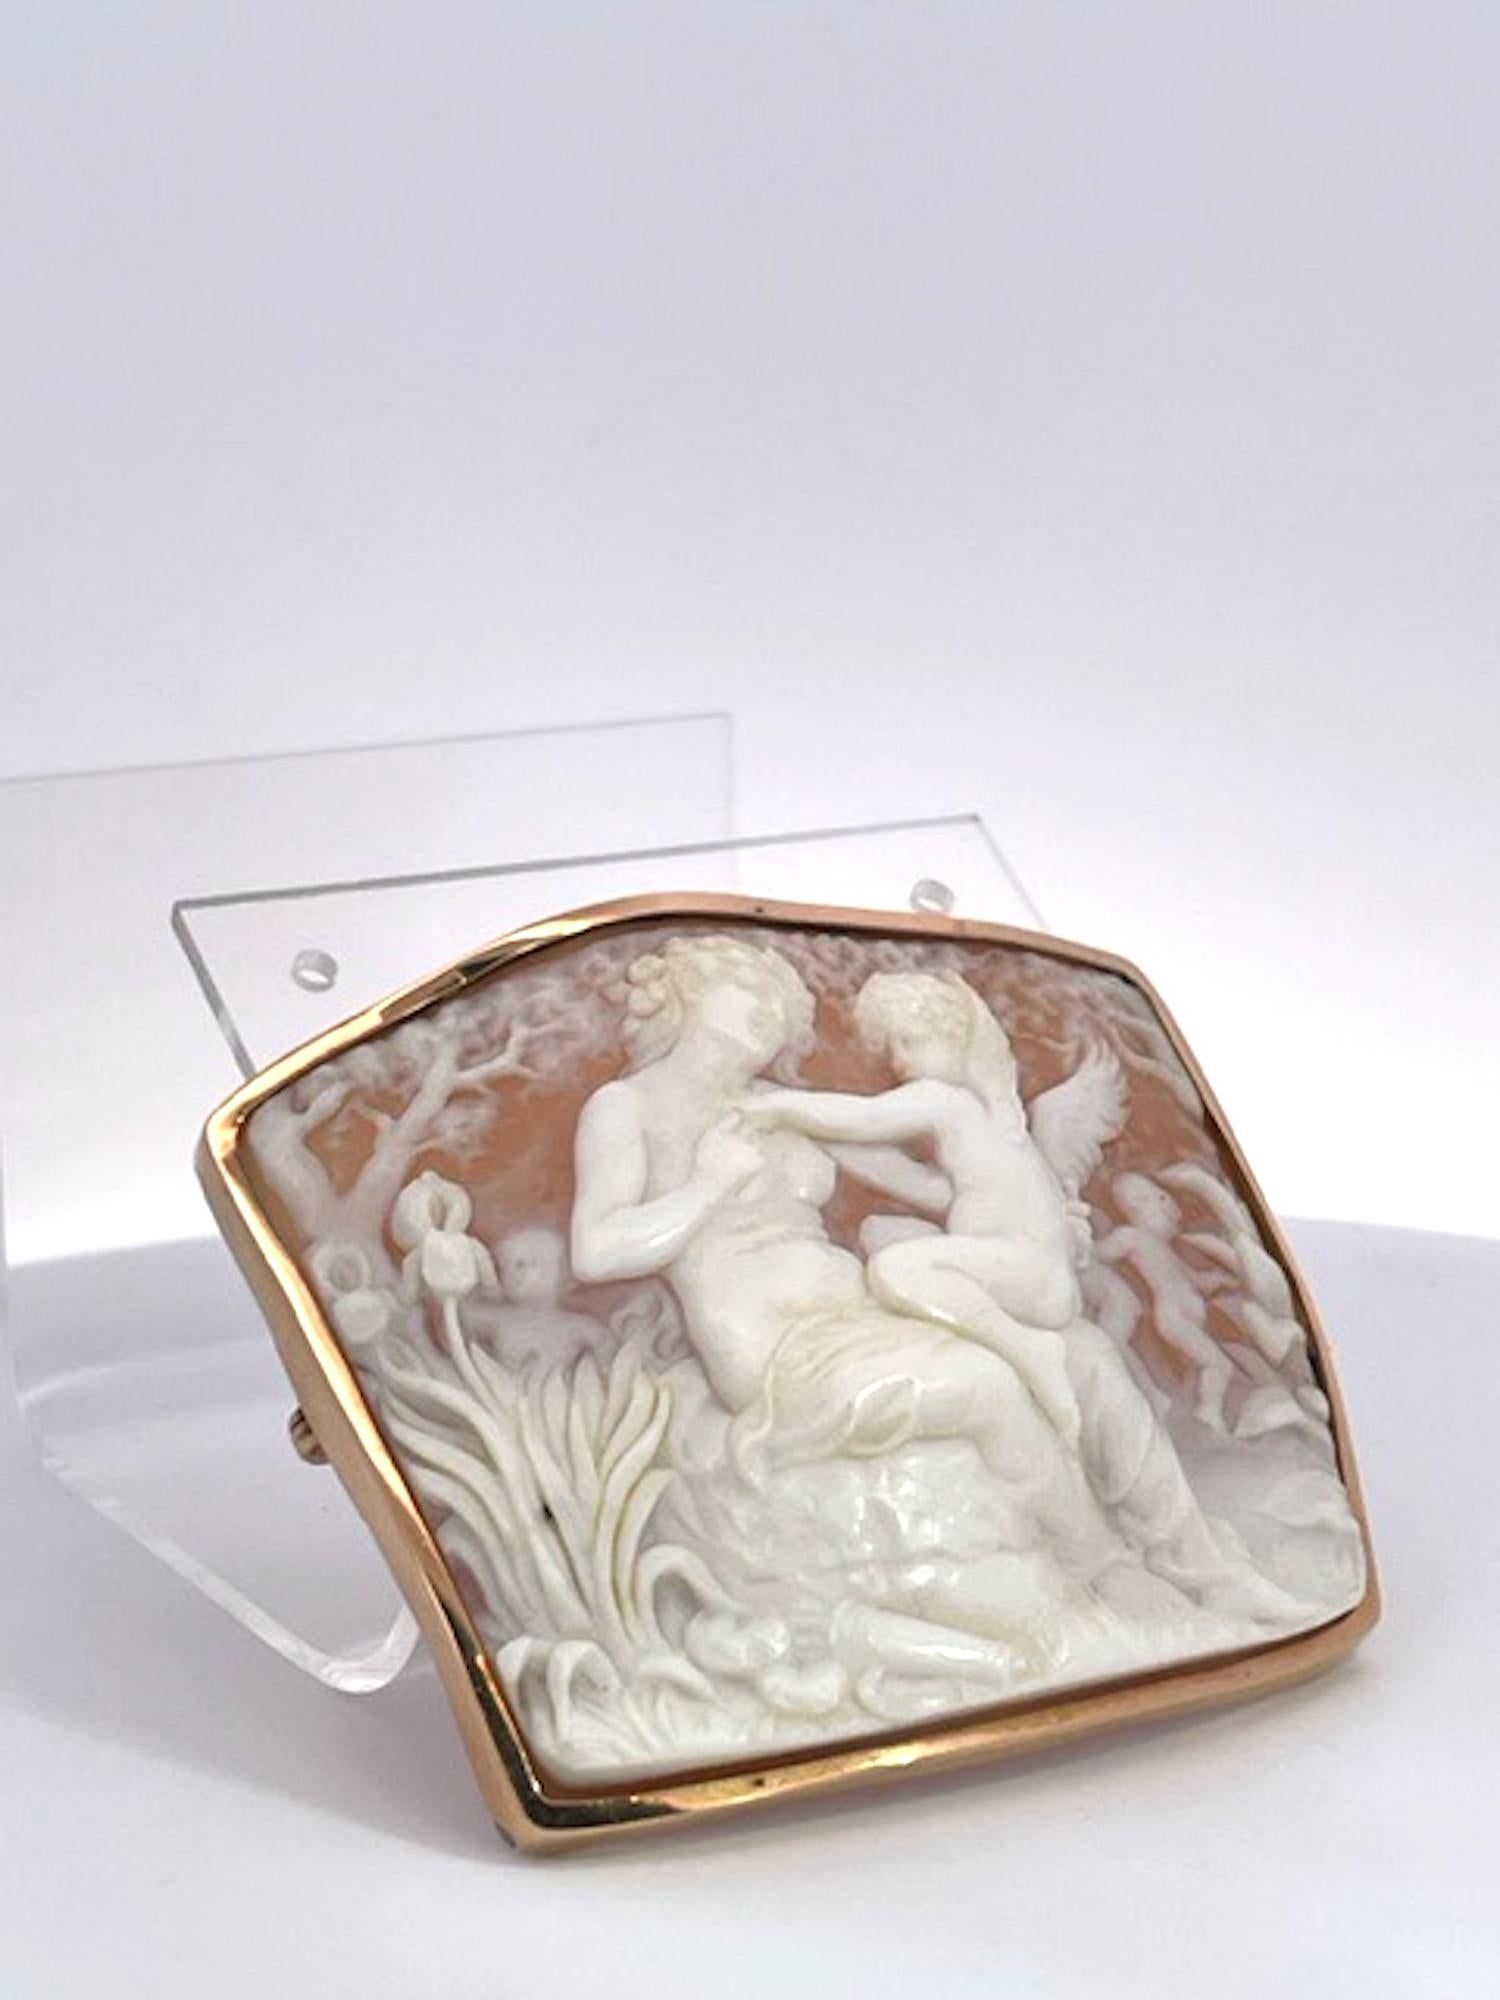 This cameo brooch is exquisite it truly is an older version than what we see today.   The carving is amazing and the Shell is really thin you can see the carvings on the reverse side.  The shell is curved as all good and older cameos are and the